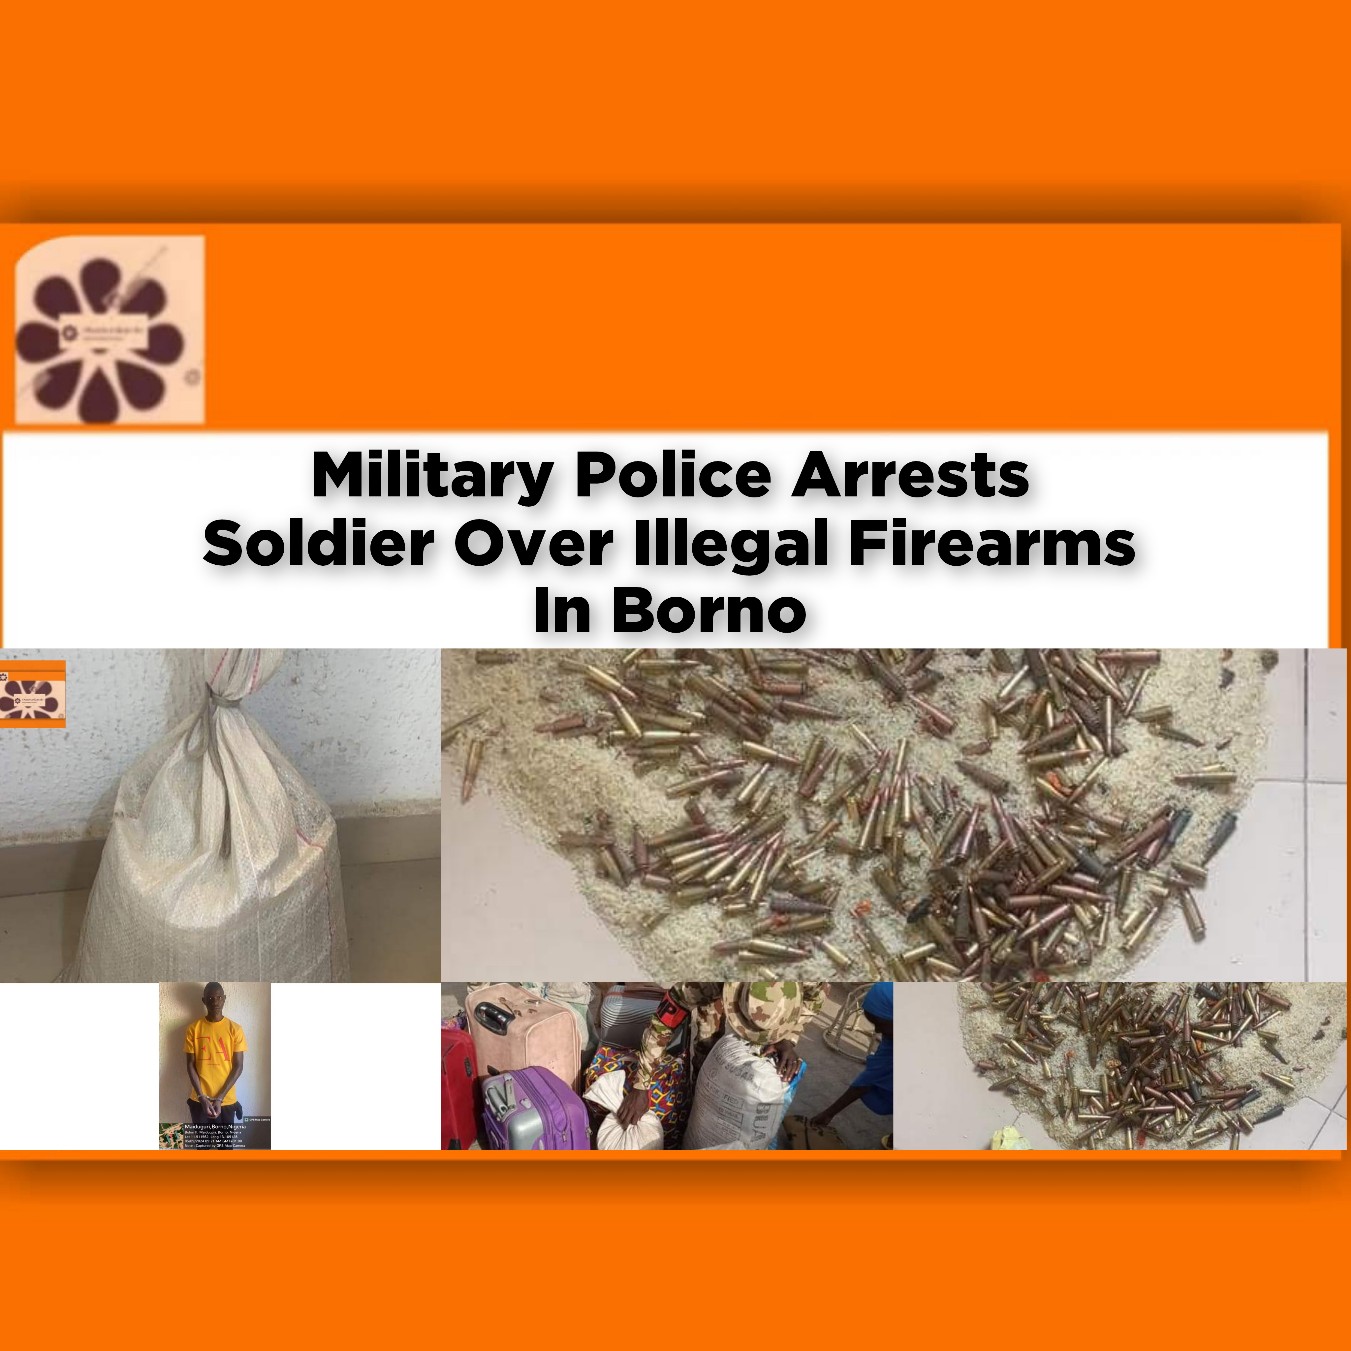 Military Police Arrests Soldier Over Illegal Firearms In Borno ~ OsazuwaAkonedo #army